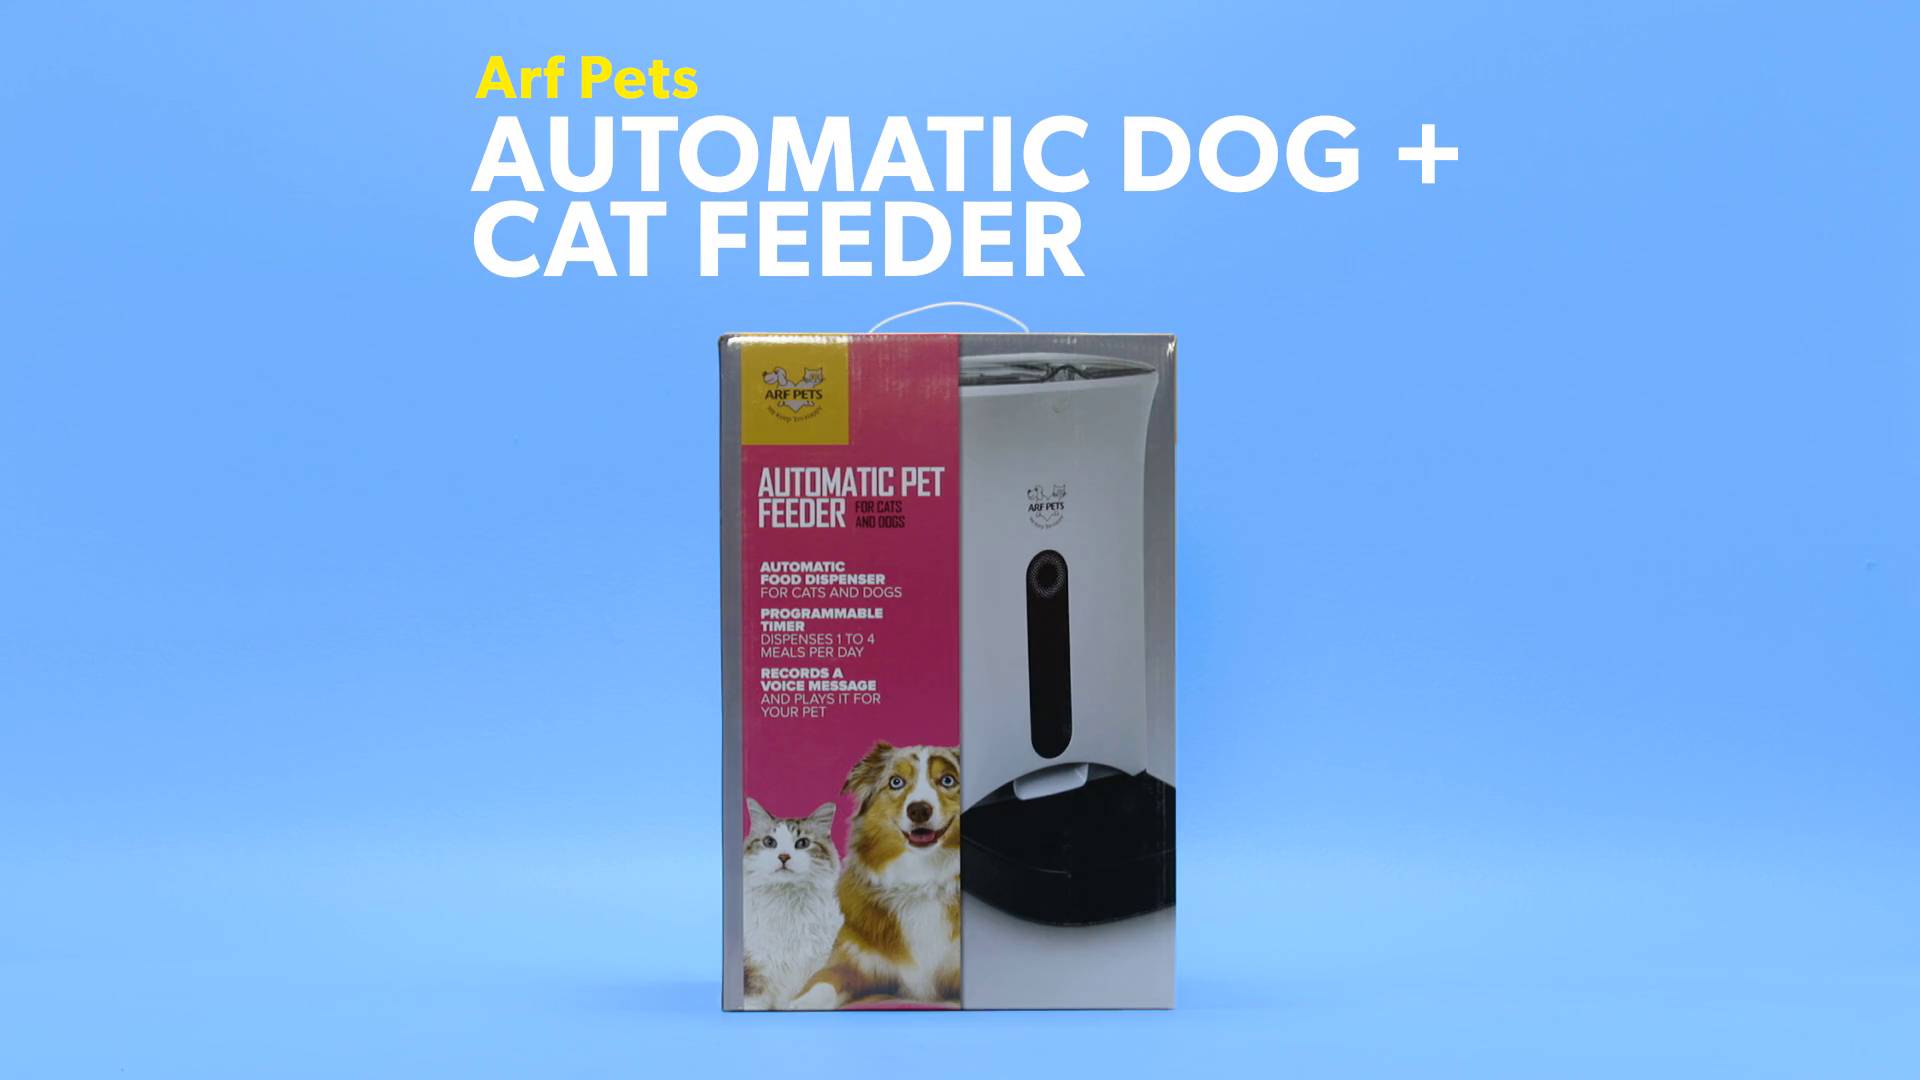 Arf Pets Automatic Pet Feeder Portion Sizes Chart